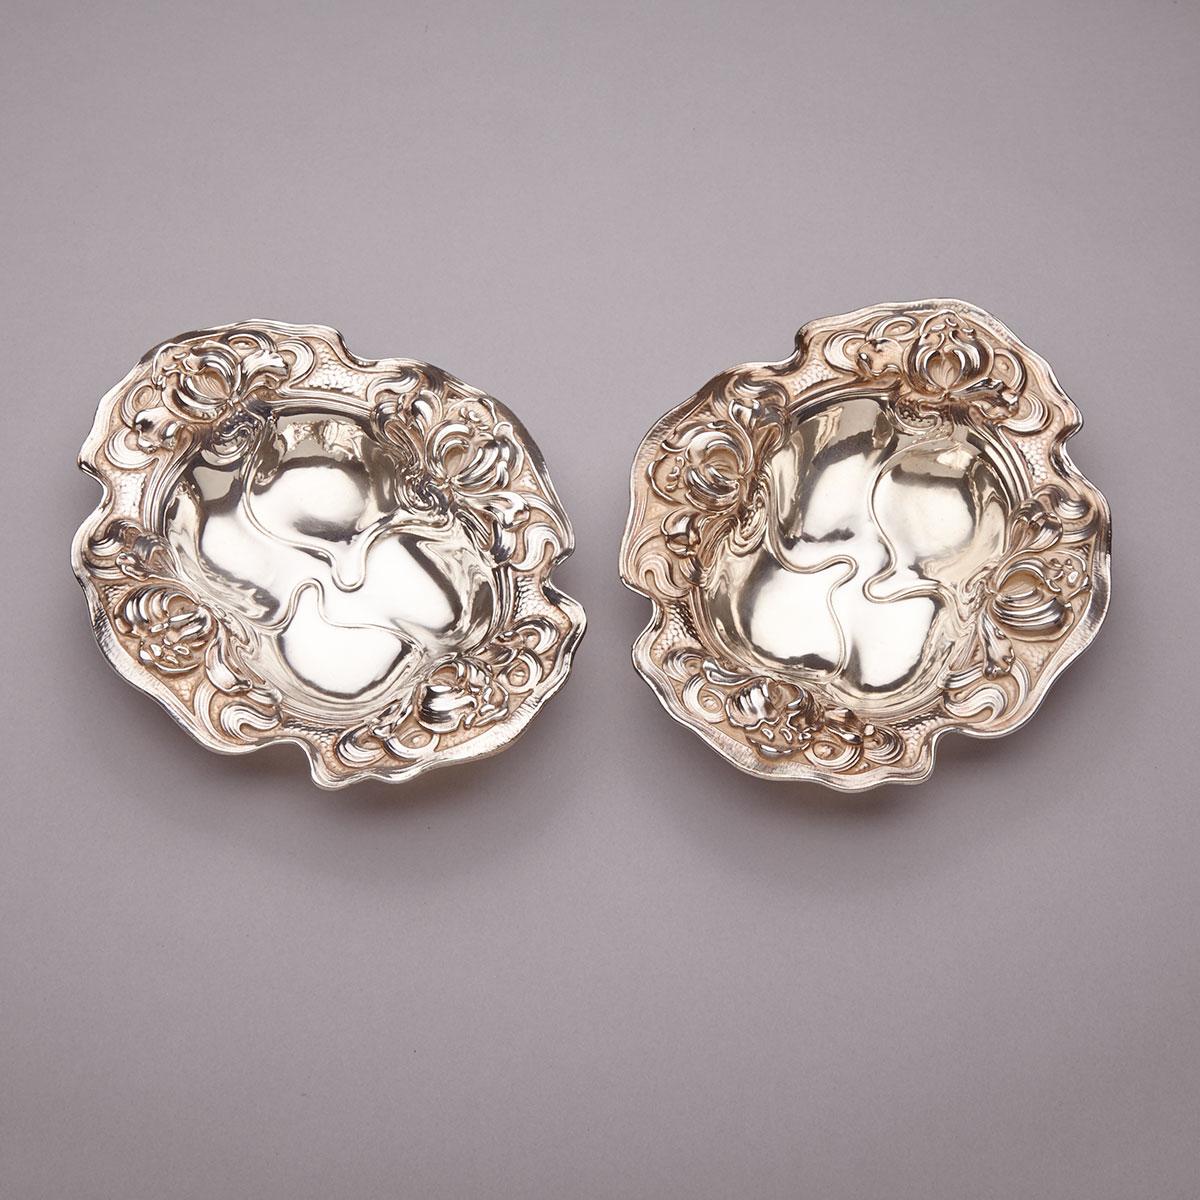 Pair of American Silver Shaped Oval Dishes, William B. Kerr, Newark, N.J., c.1900